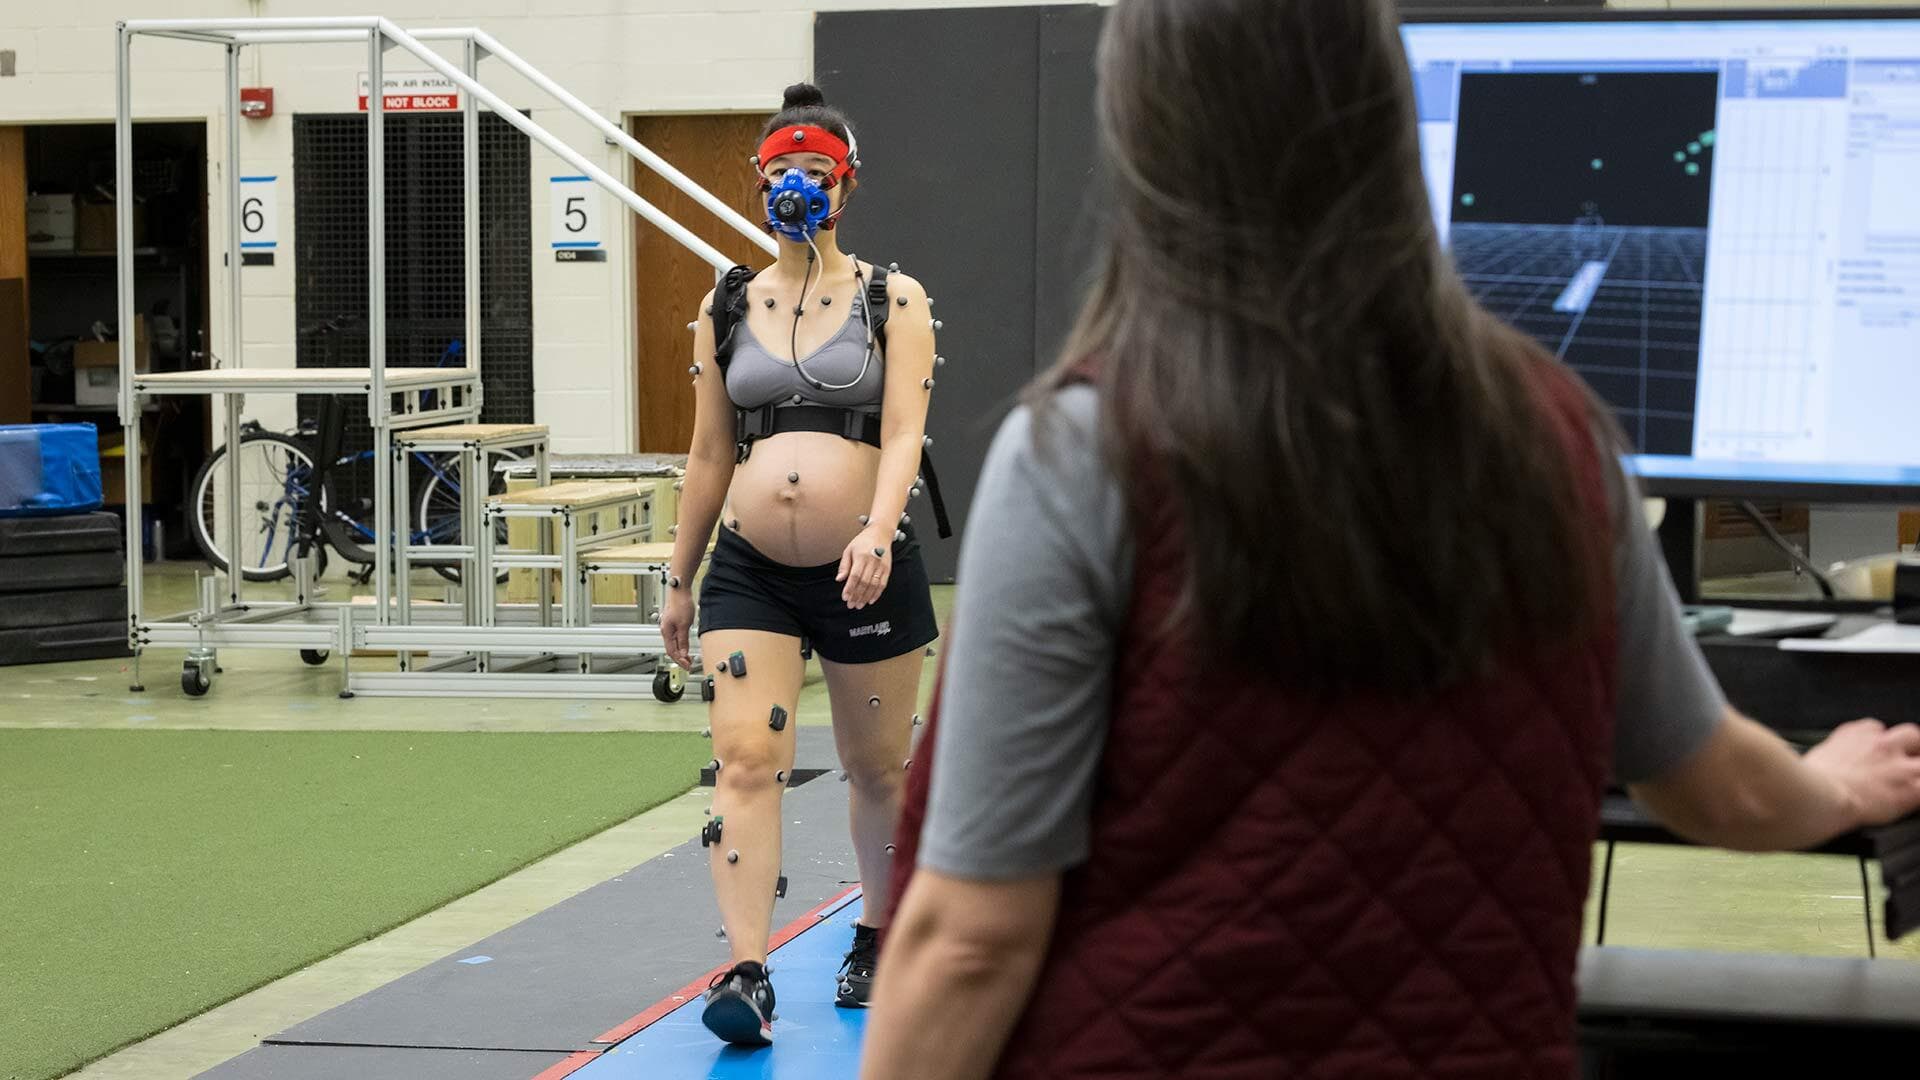 Karen Shih walks covered in sensors for a study on gait changes in pregnancy